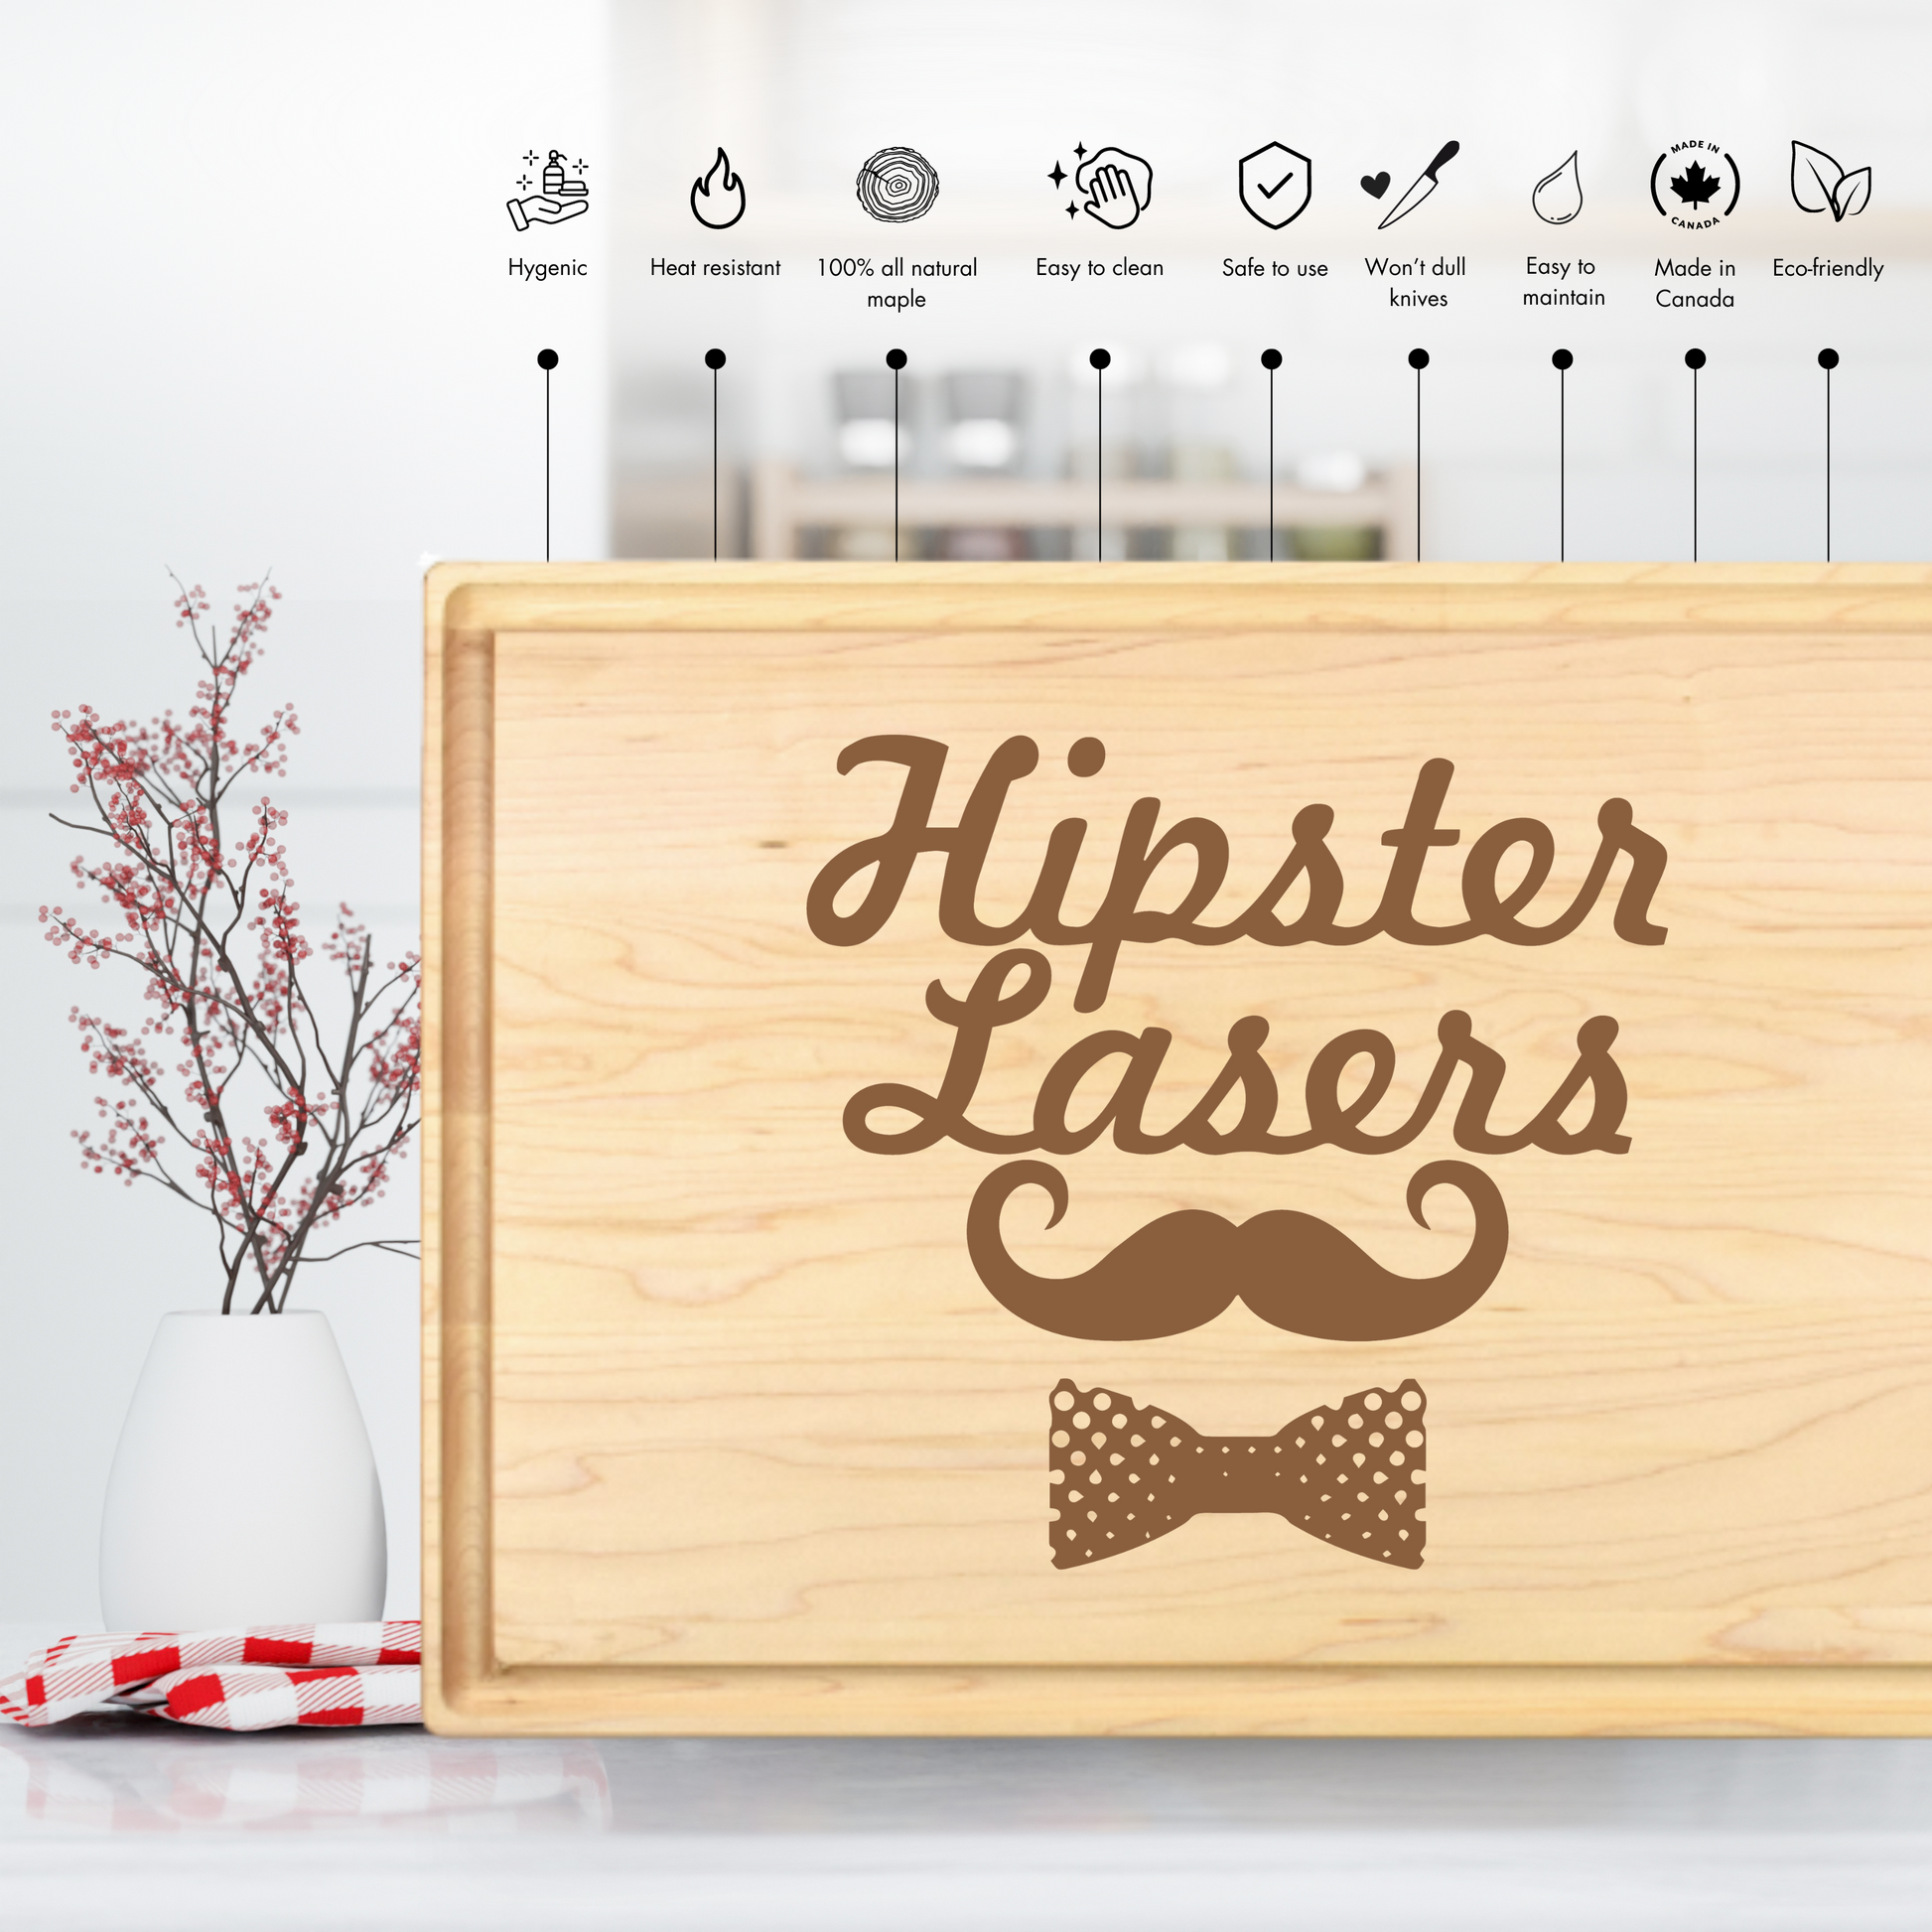 Original Off Road Vehicles Cutting Board - Premium Cutting Boards from Hipster Lasers - Just $70! Shop now at Hipster Lasers